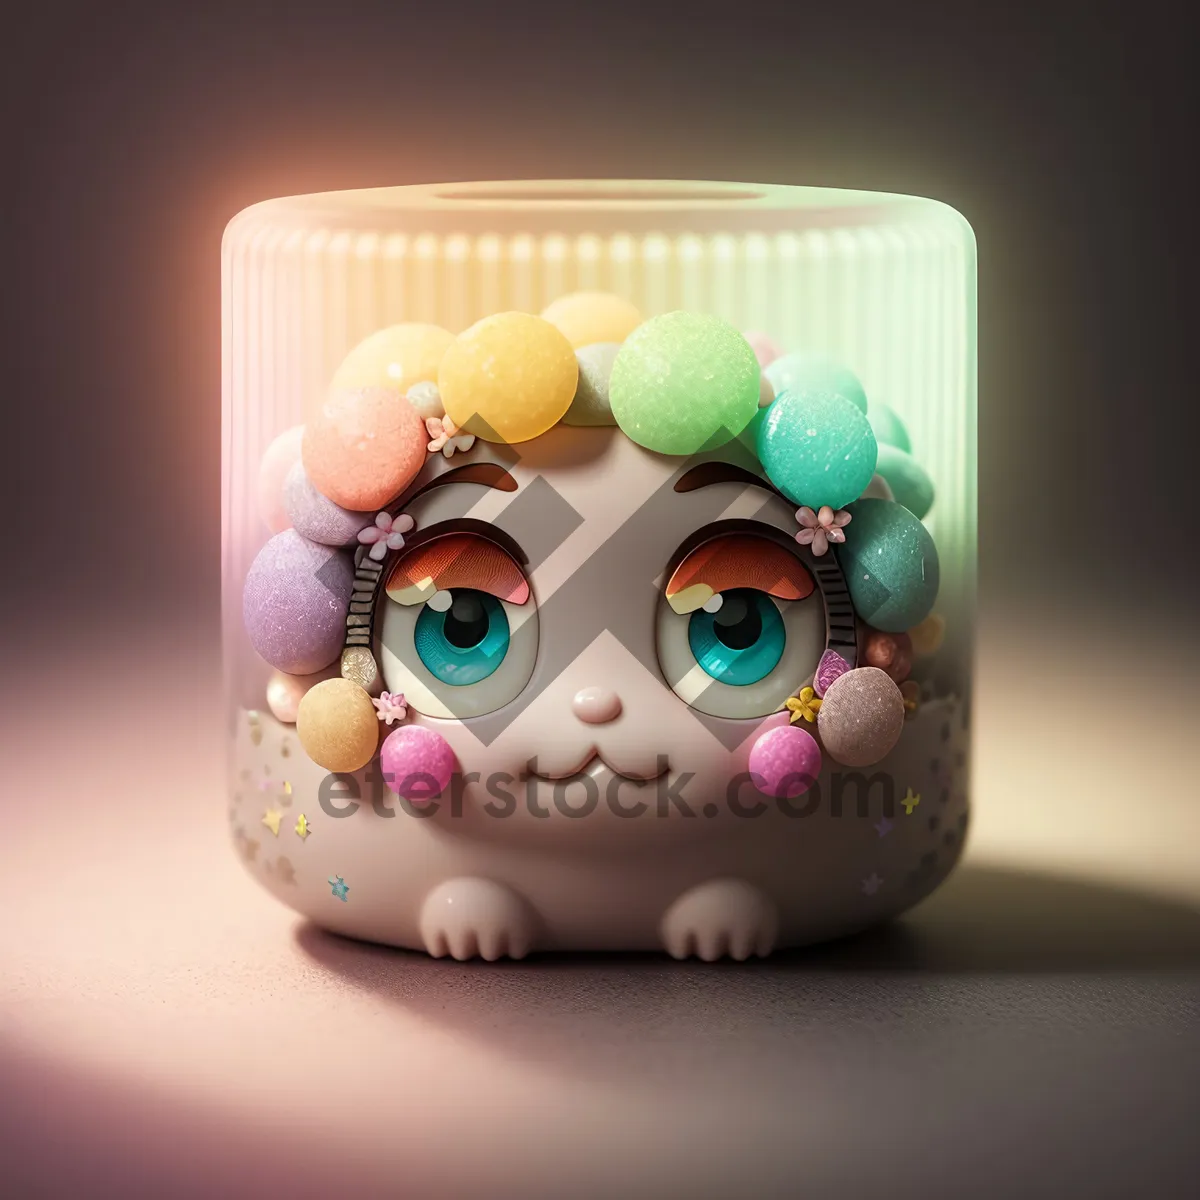 Picture of Jelly Toy Doll: Colorful Decorative Substance Design